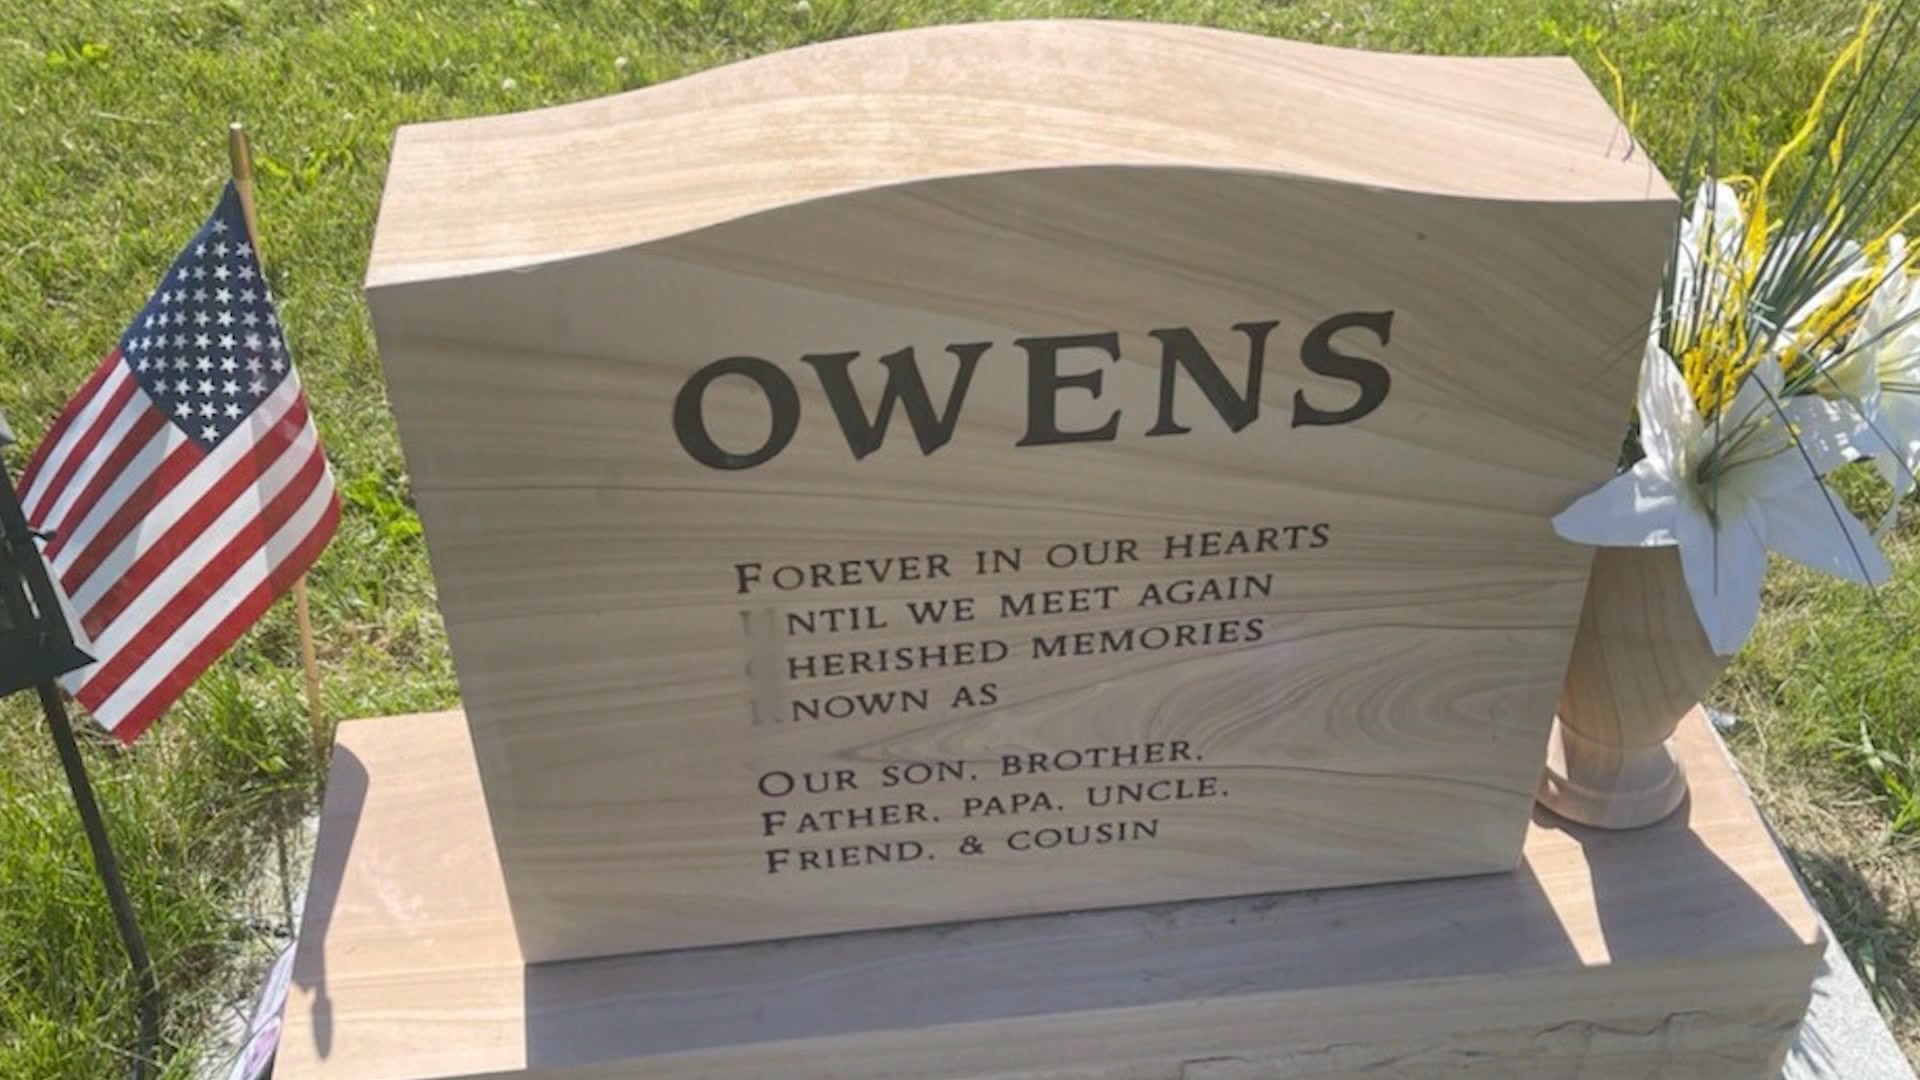 The community is preparing legal action to have the message removed from the headstone.